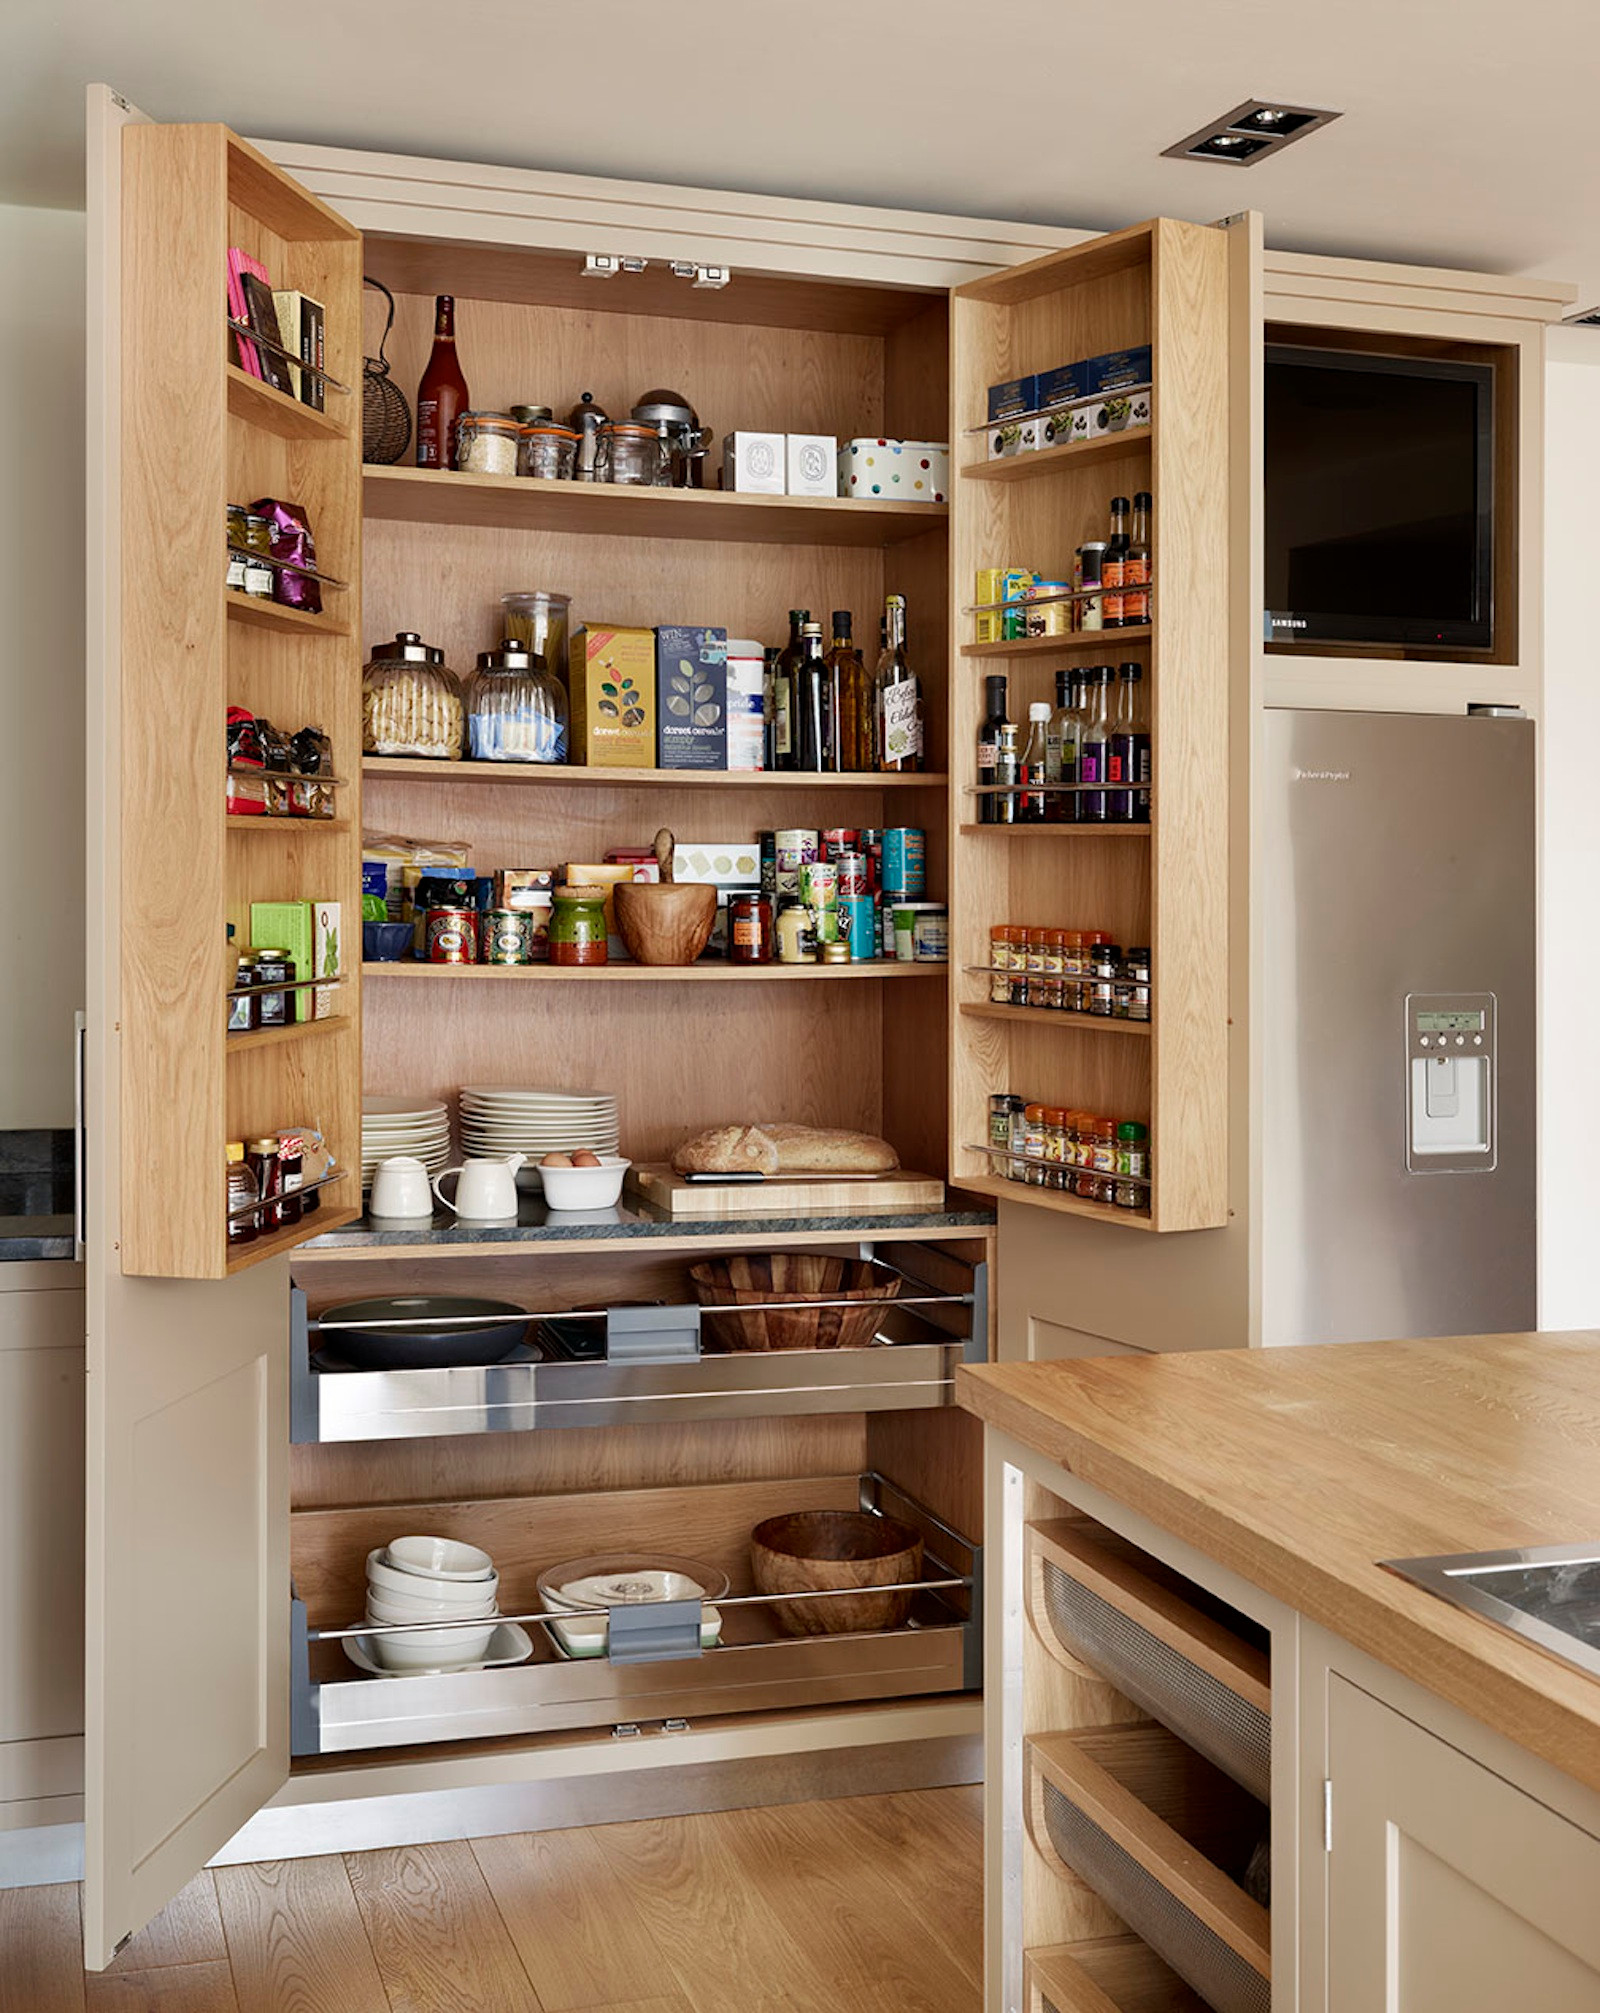 5 Kitchen Pantry Designs, For Homes of All Sizes